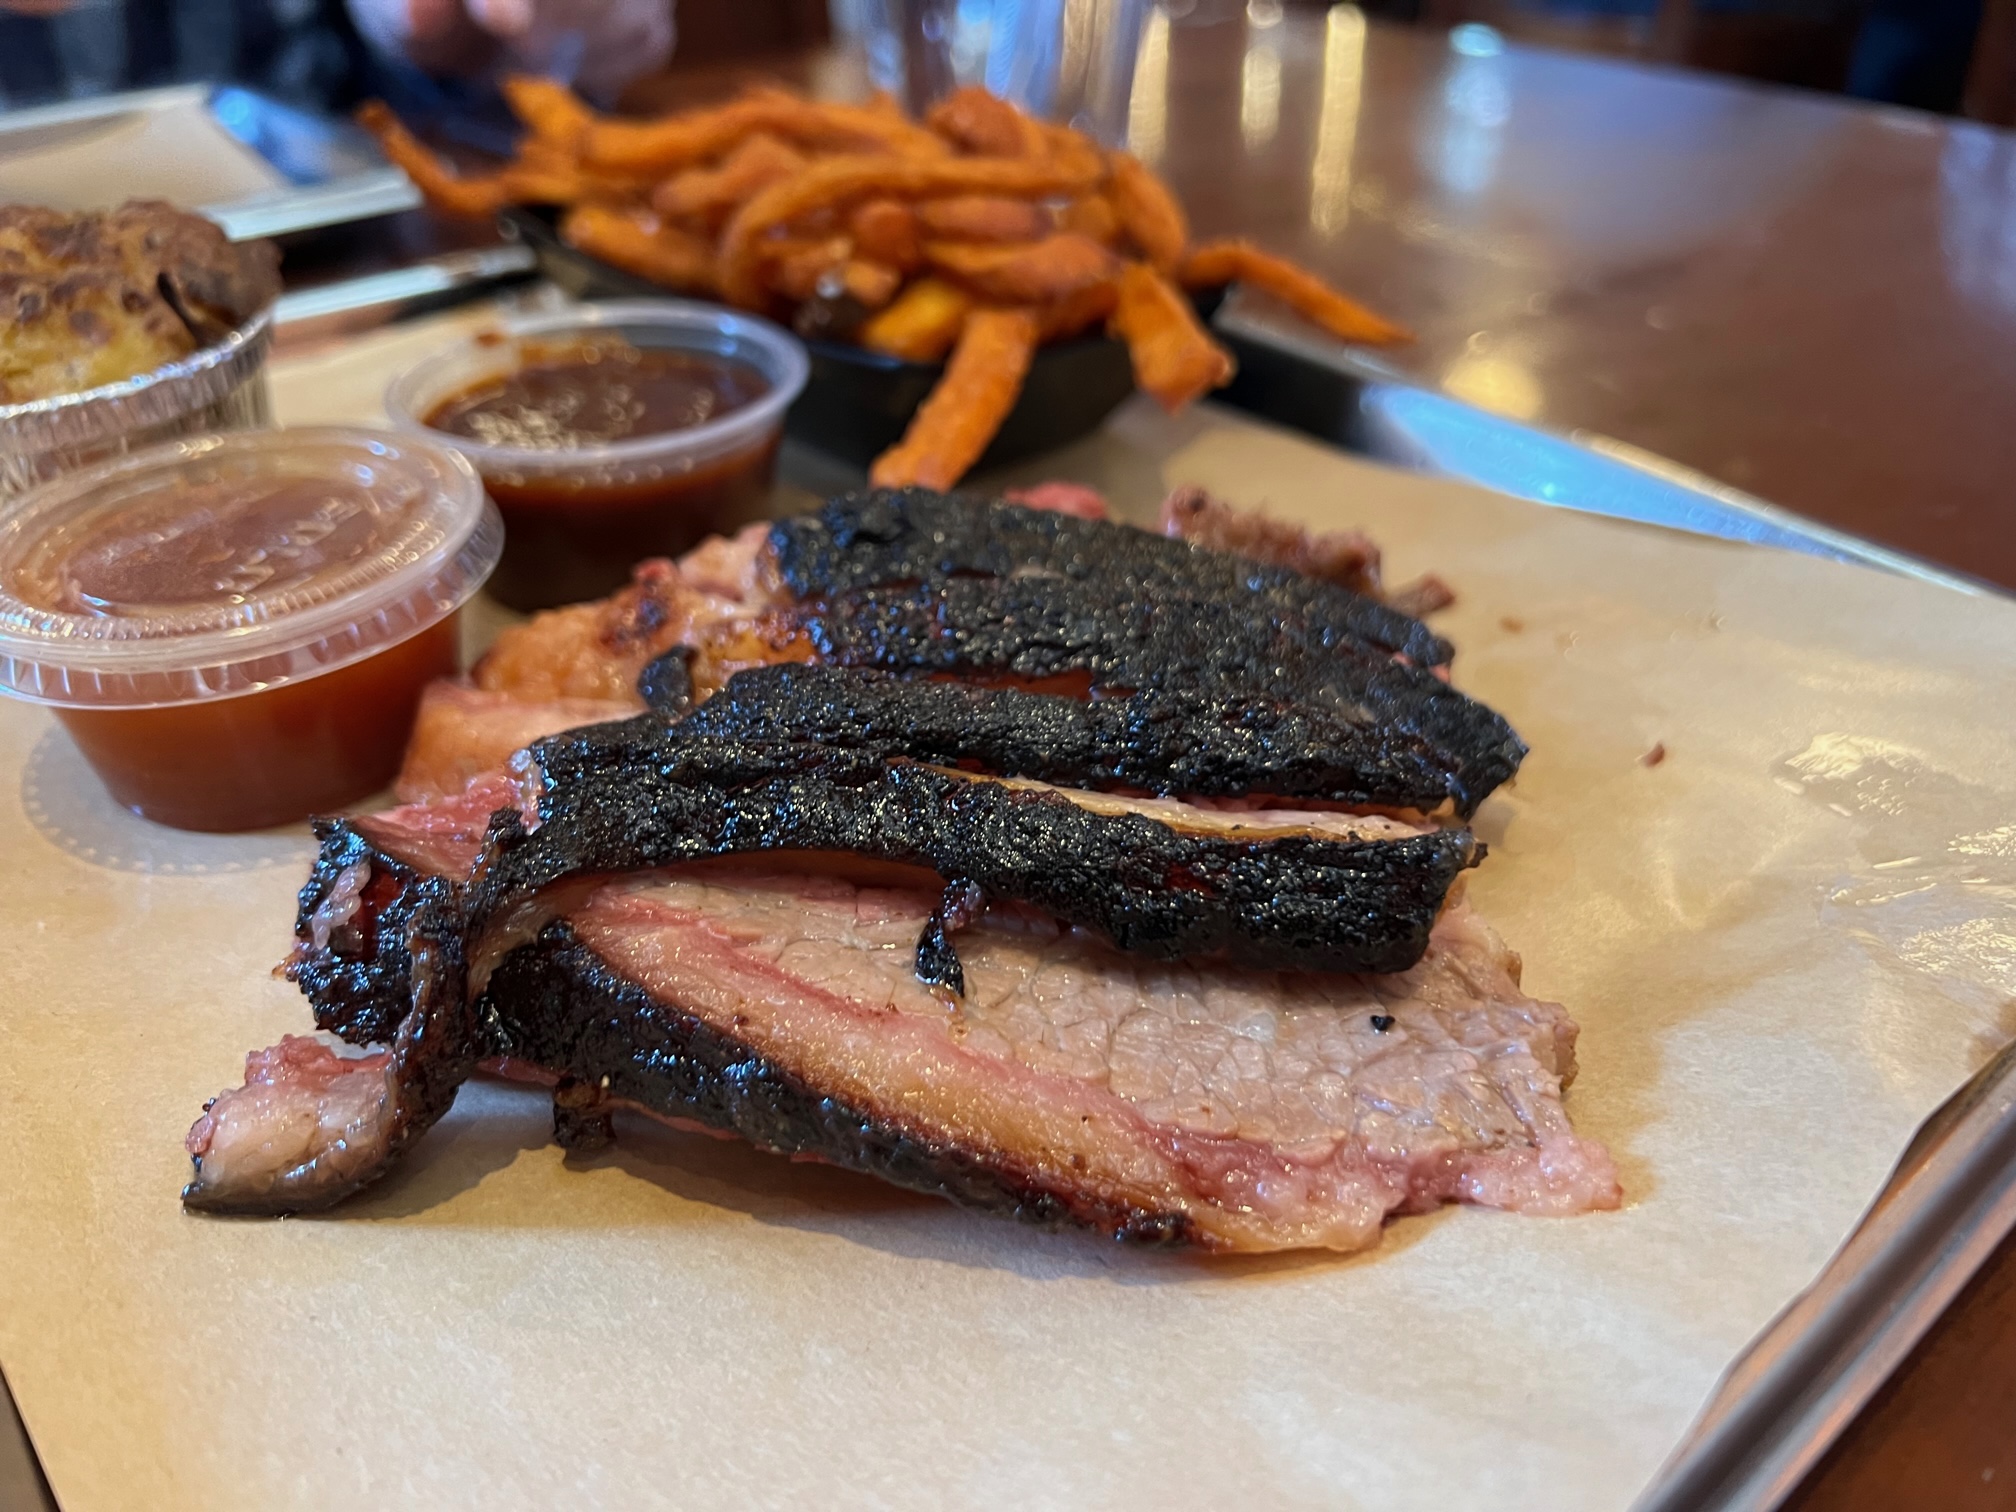 On a metal tray at Black Dog Smoke & Ale, there is a half pound of burnt ends, two side cups of sauce, a side of sweet potato fries, and a side of twice baked potato casserole. Photo by Alyssa Buckley.